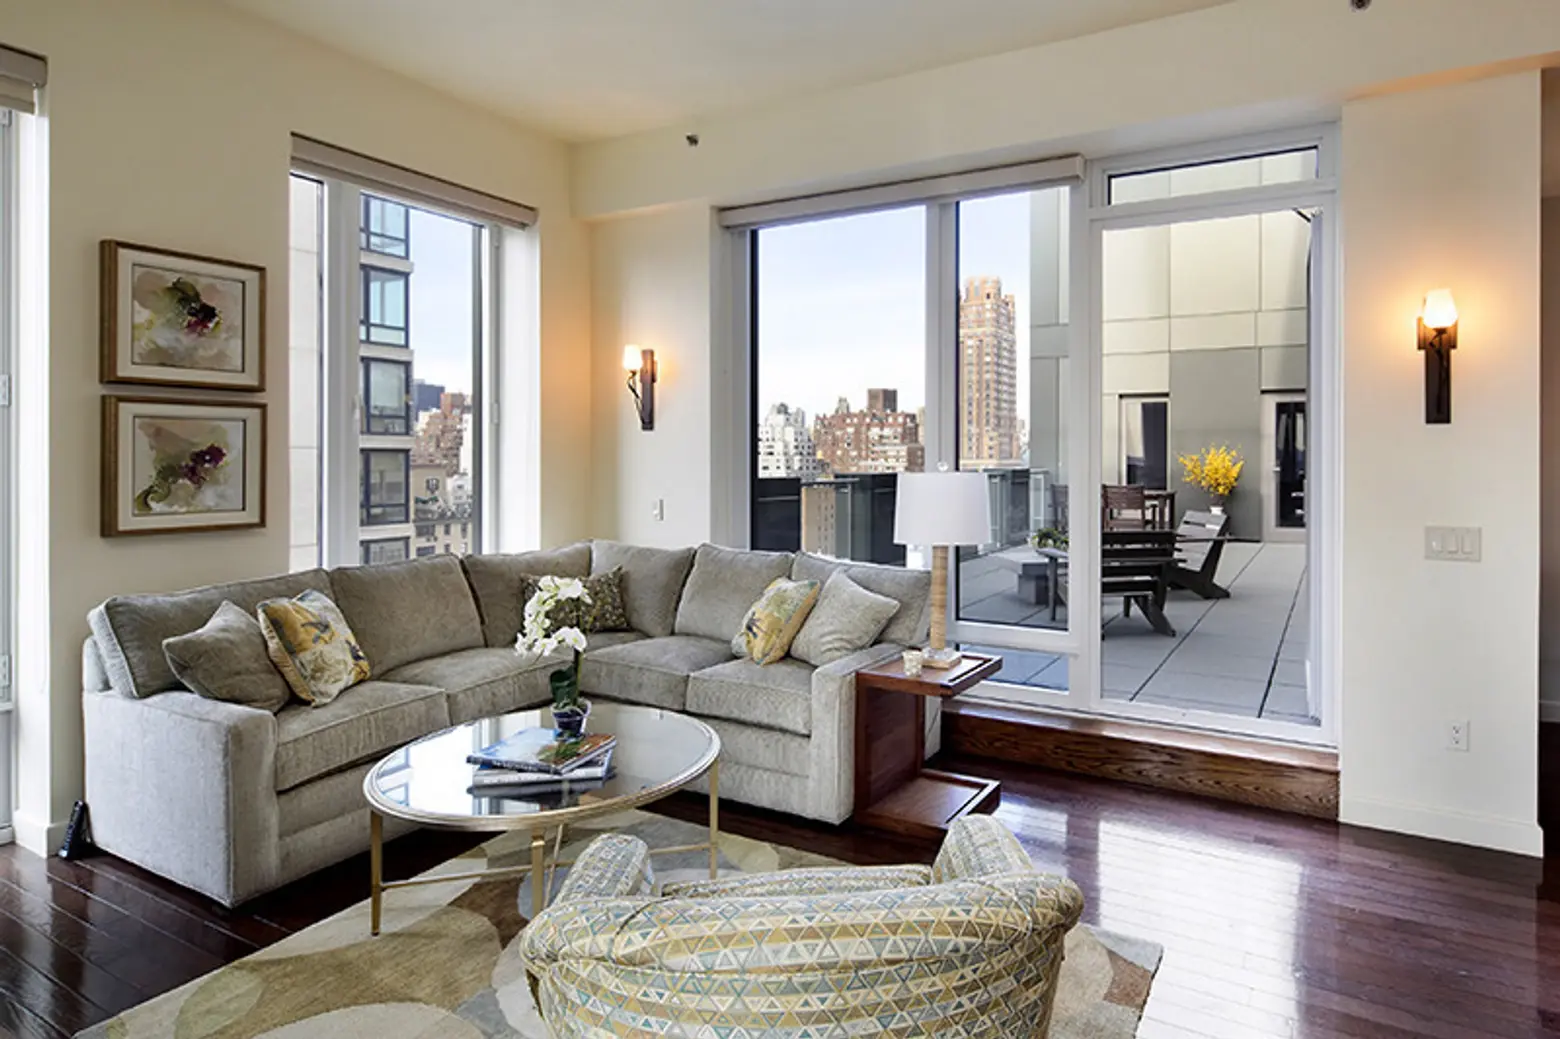 Commissioner of Baseball Robert Manfred Buys $5.6M UES Penthouse